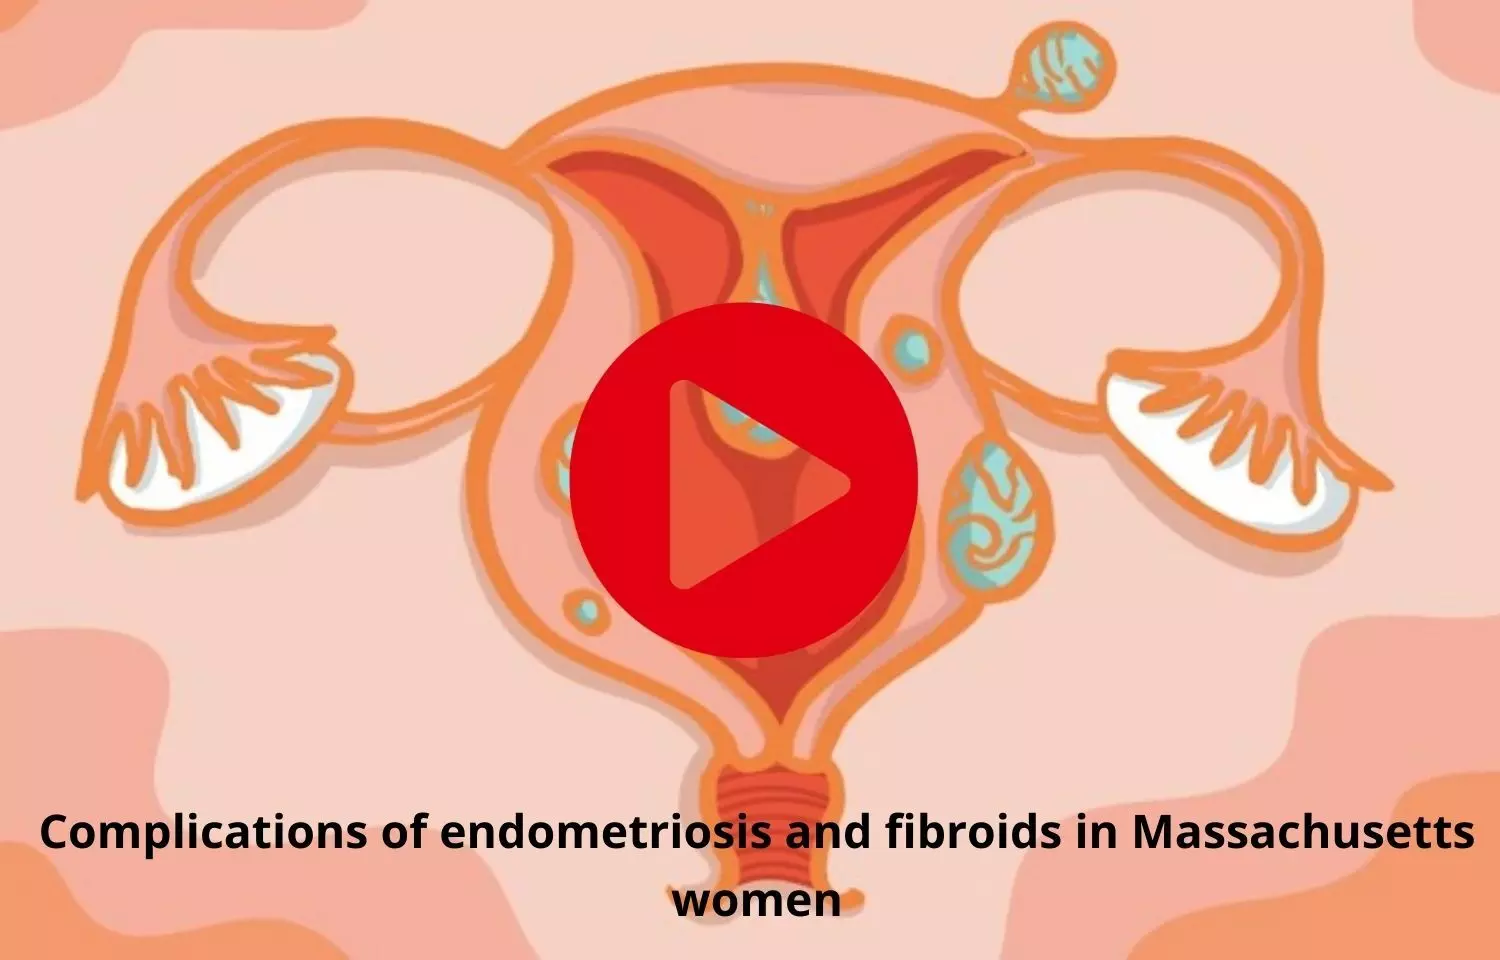 Complications of endometriosis and fibroids in Massachusetts women a concern